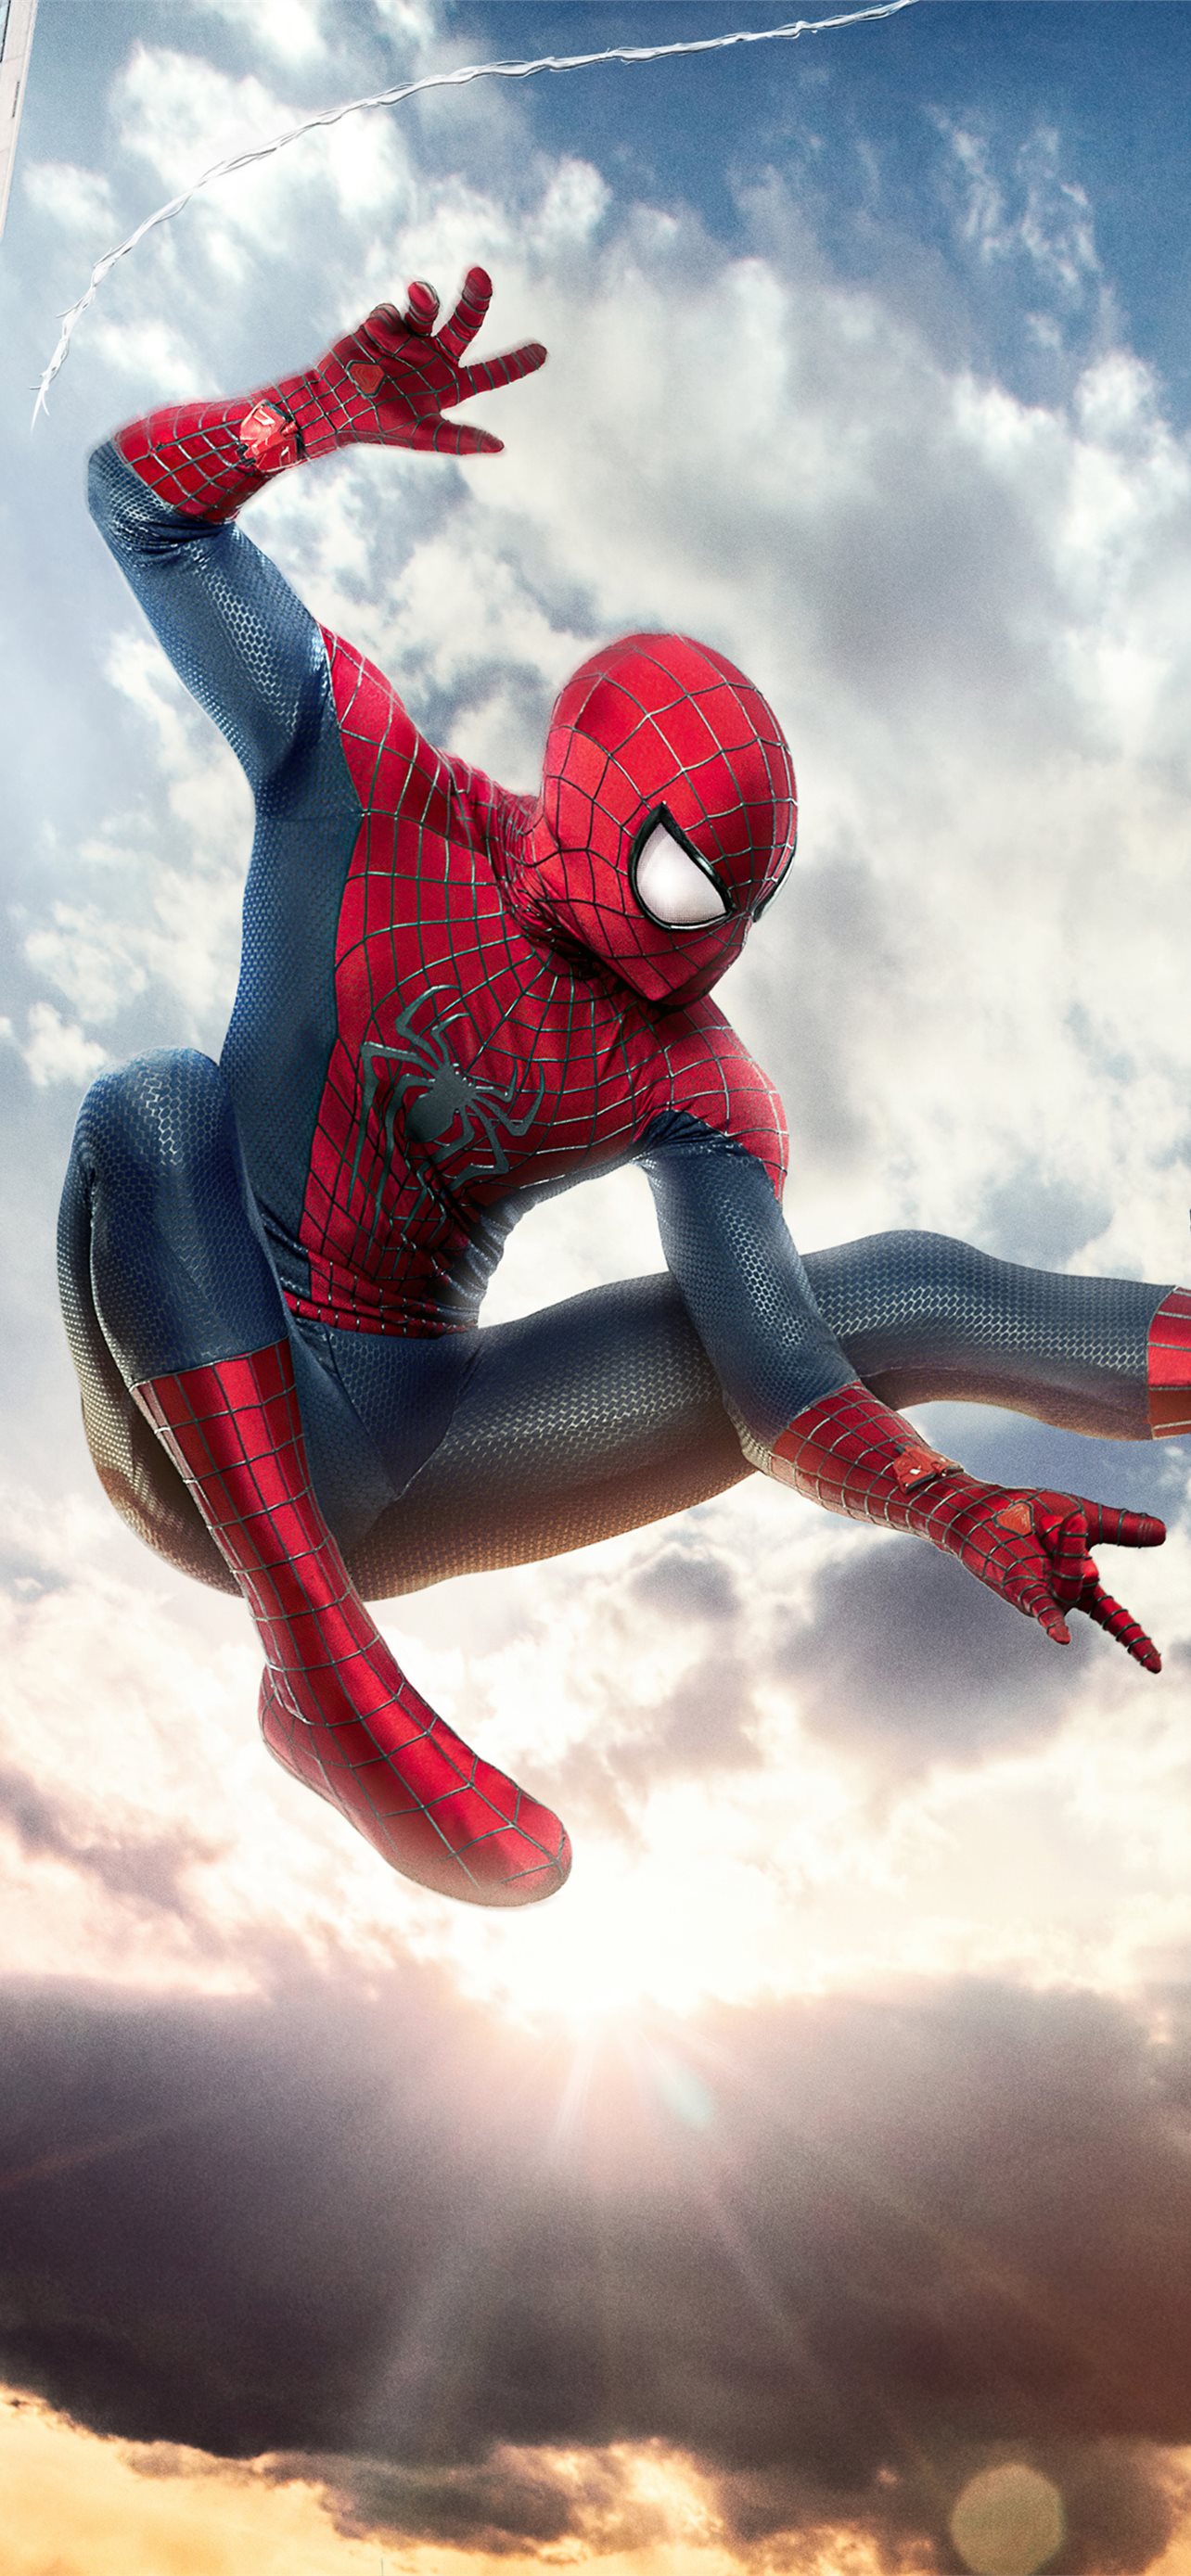 The Amazing SpiderMan 2 Wallpapers HD  Facebook Cover Photos  Amazing  spiderman The amazing spiderman 2 Spider man 2